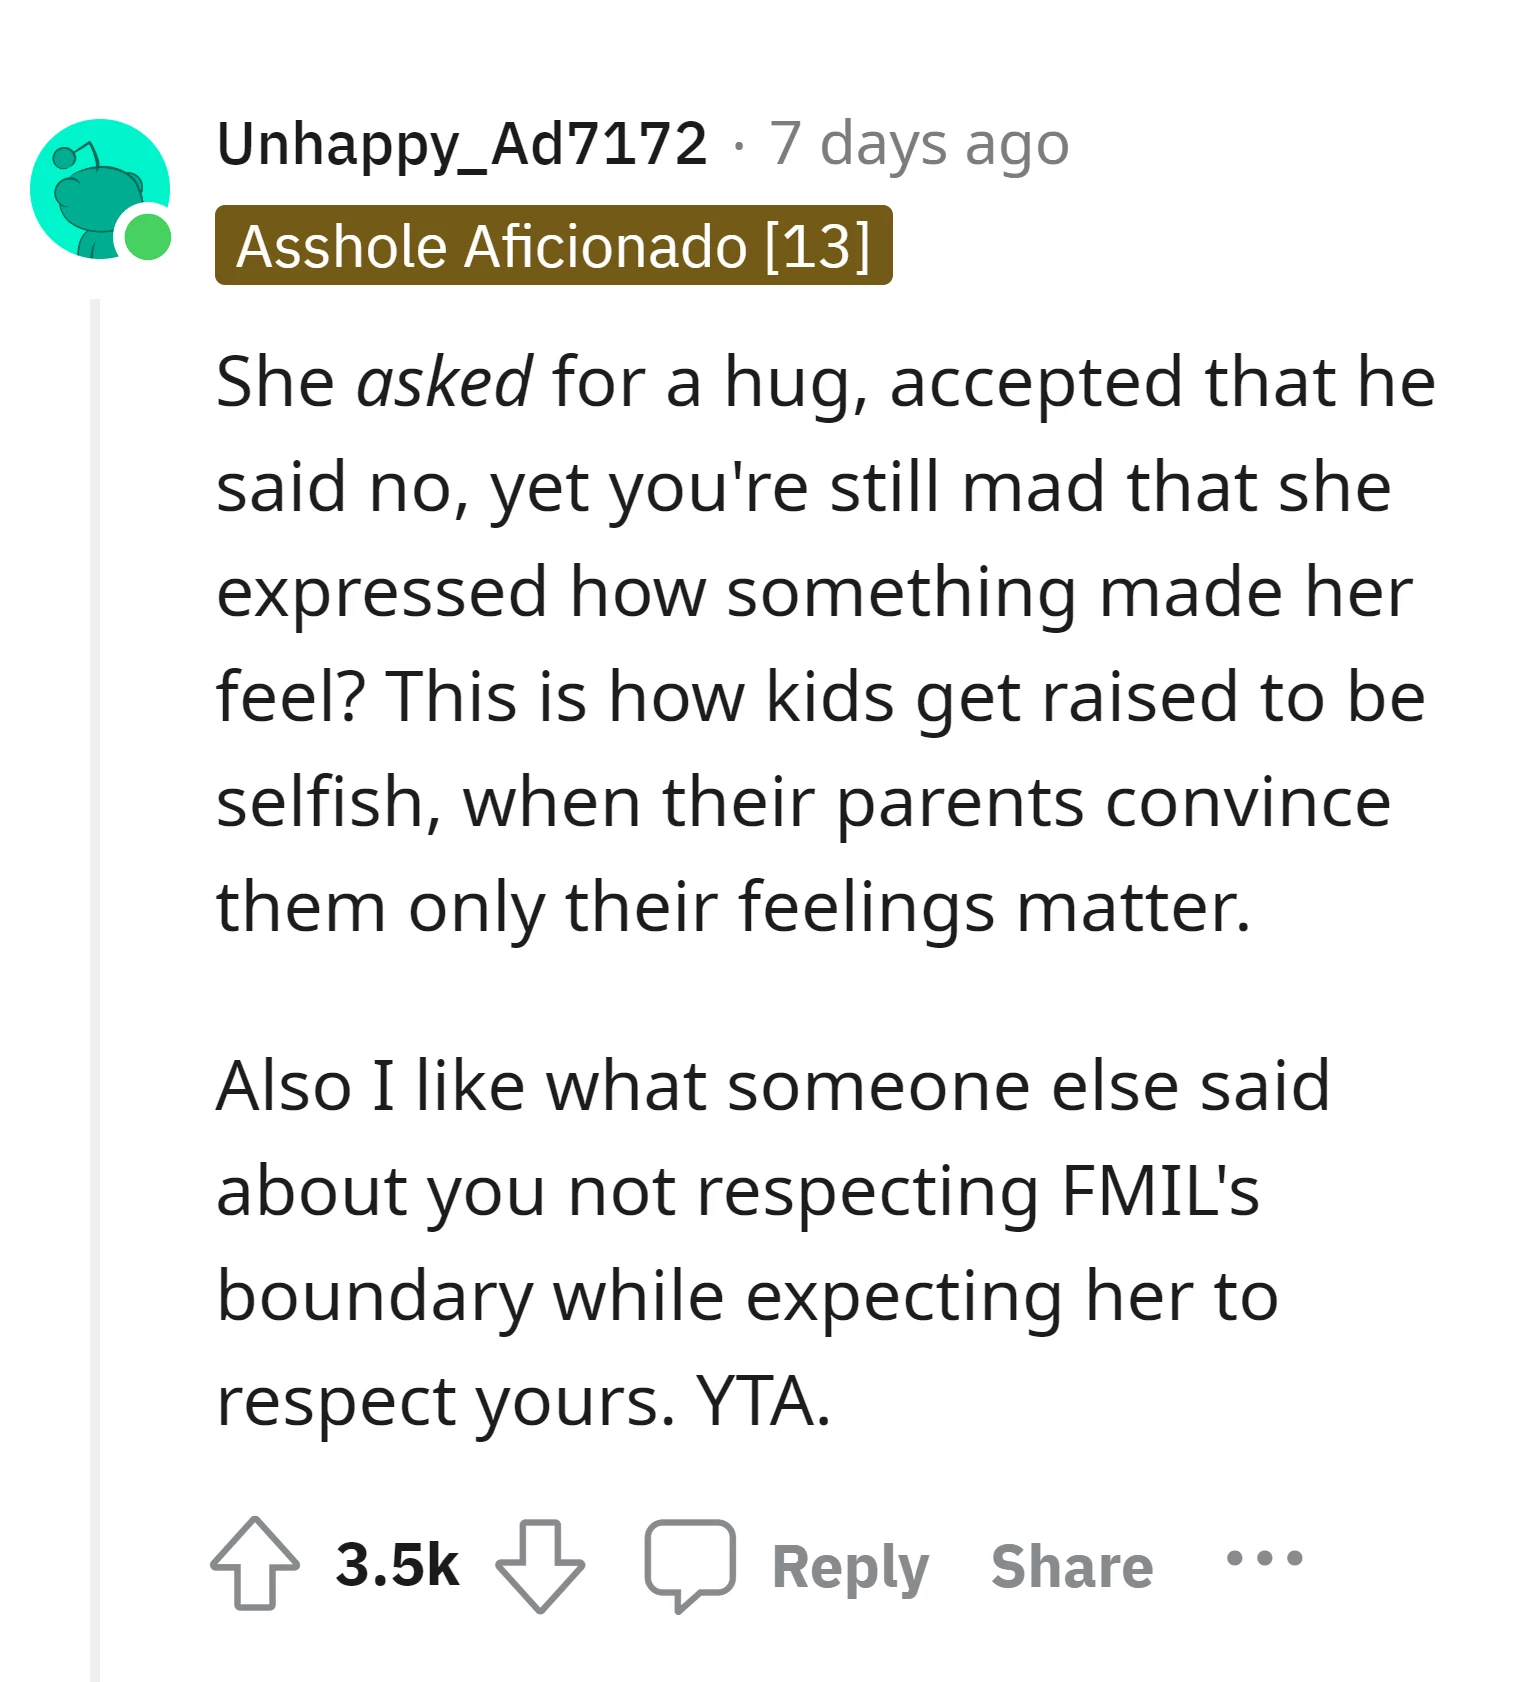 OP was in the wrong for being upset that the mother-in-law expressed her feelings